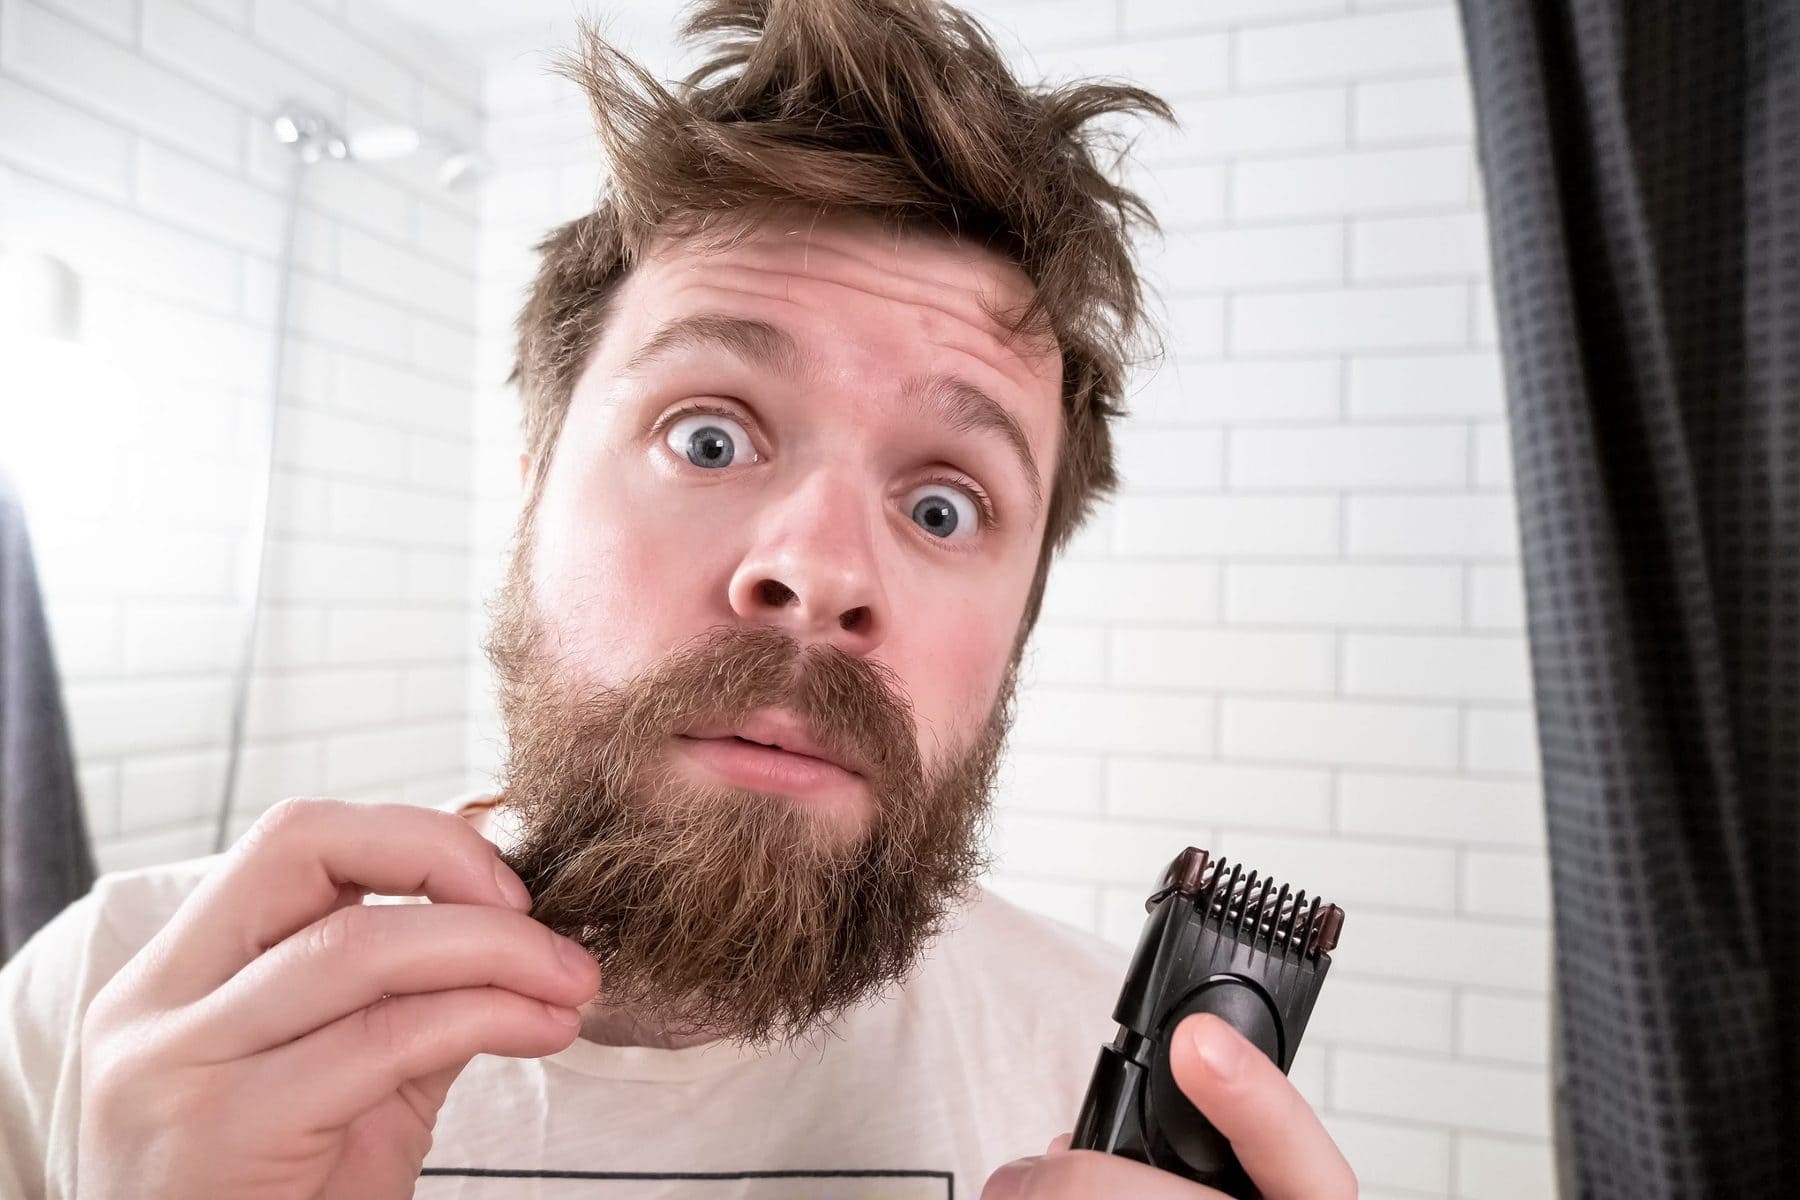 trimmer for cutting hair and beard